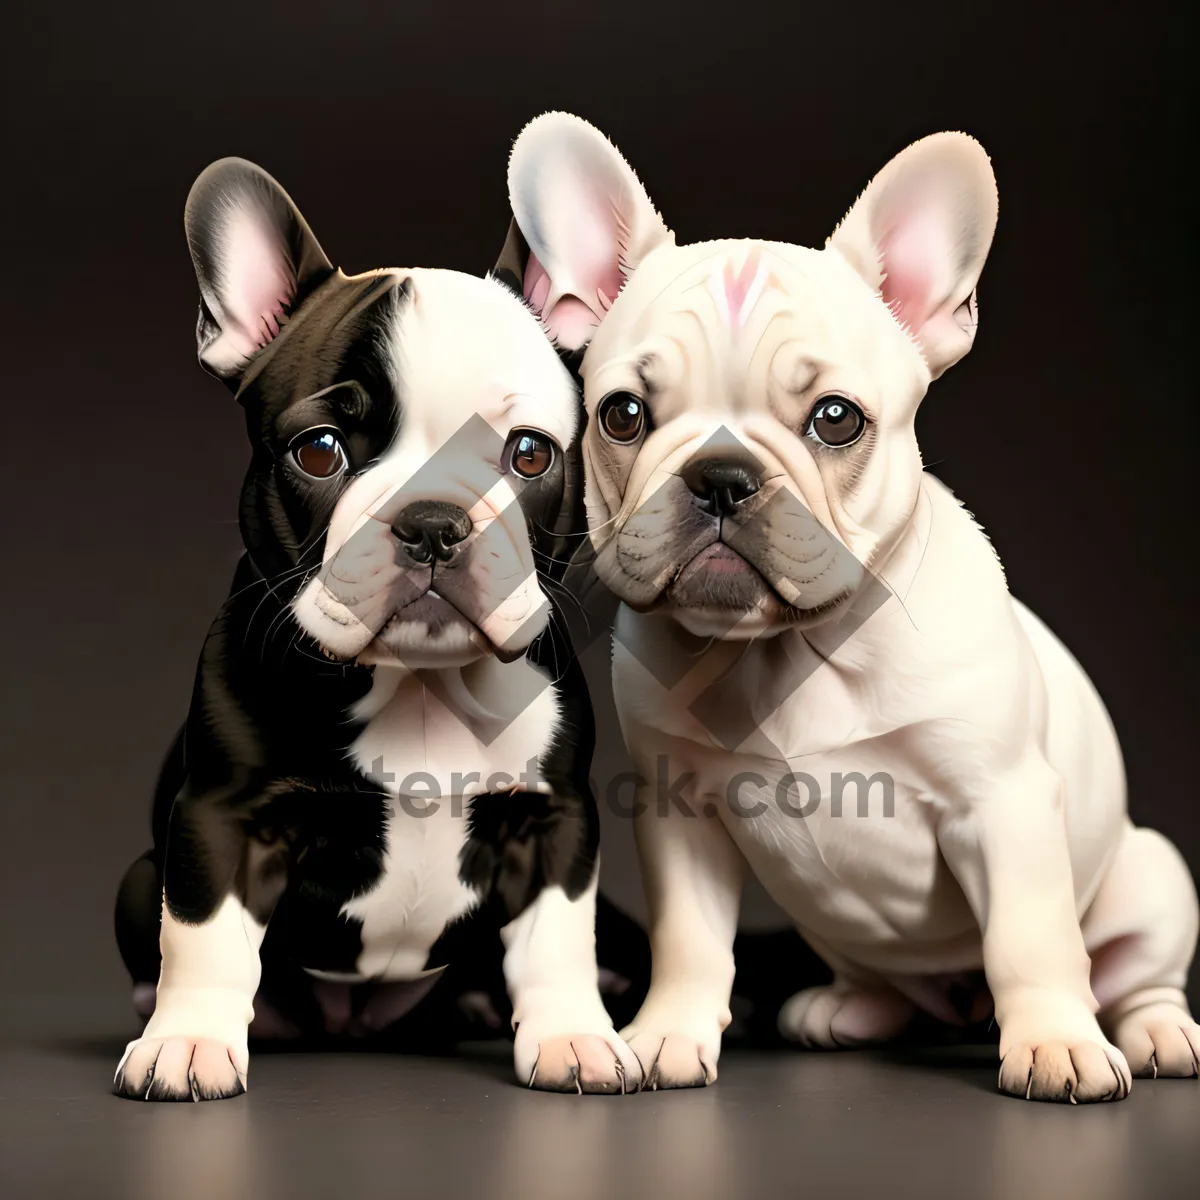 Picture of Cute Bulldog Puppy with Adorable Wrinkles - Studio Portrait